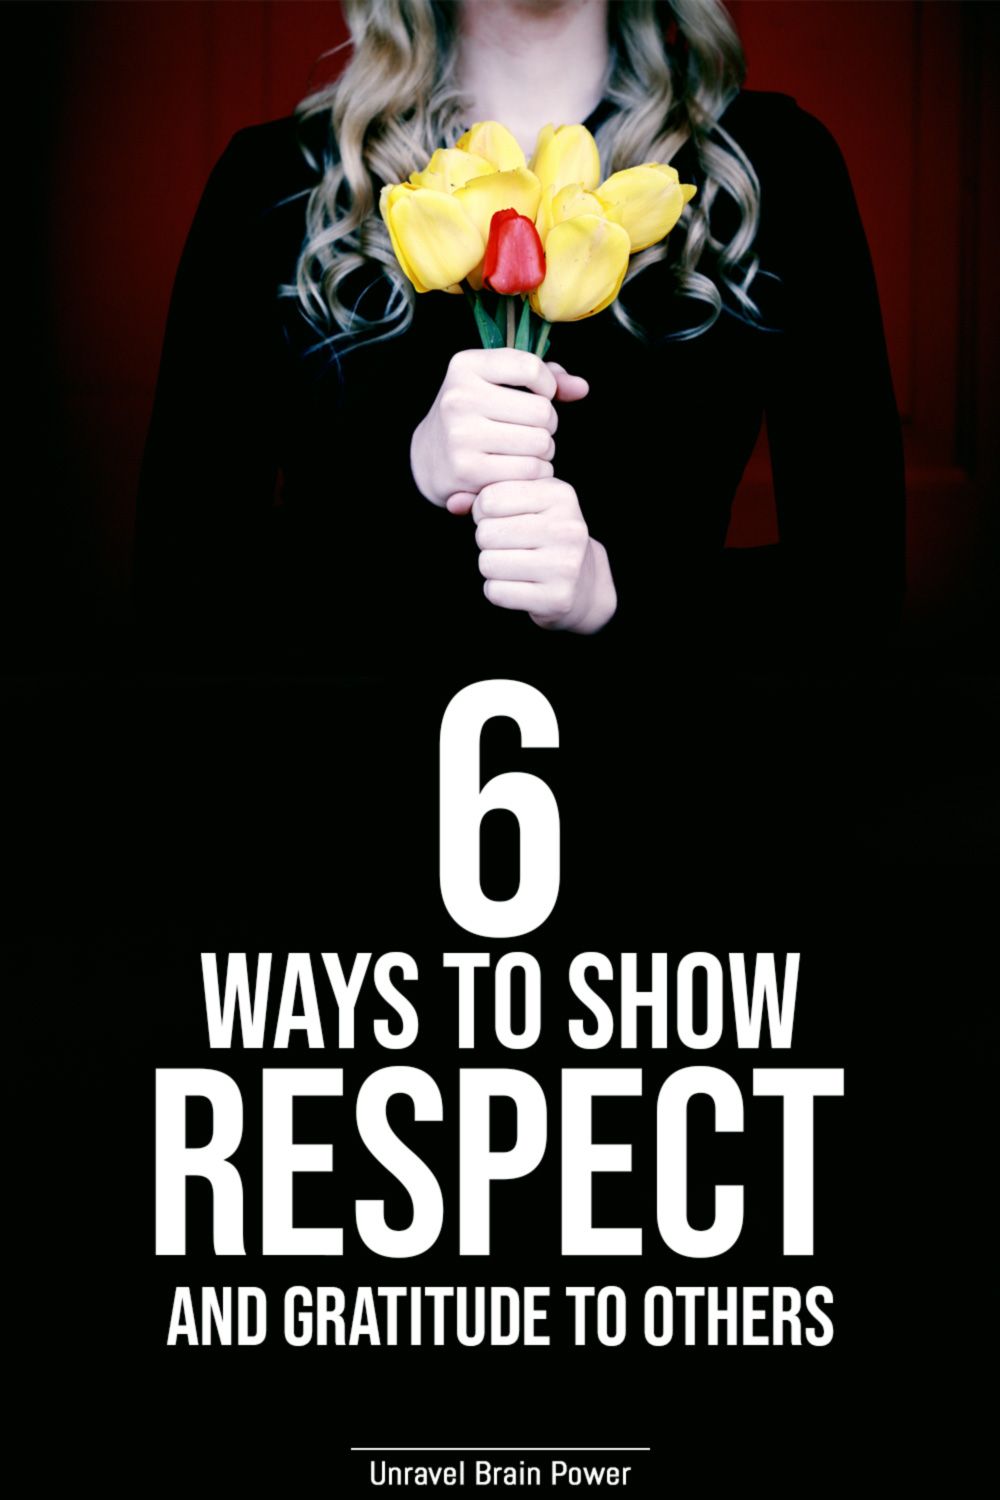 6 Ways To Show Respect and Gratitude To Others